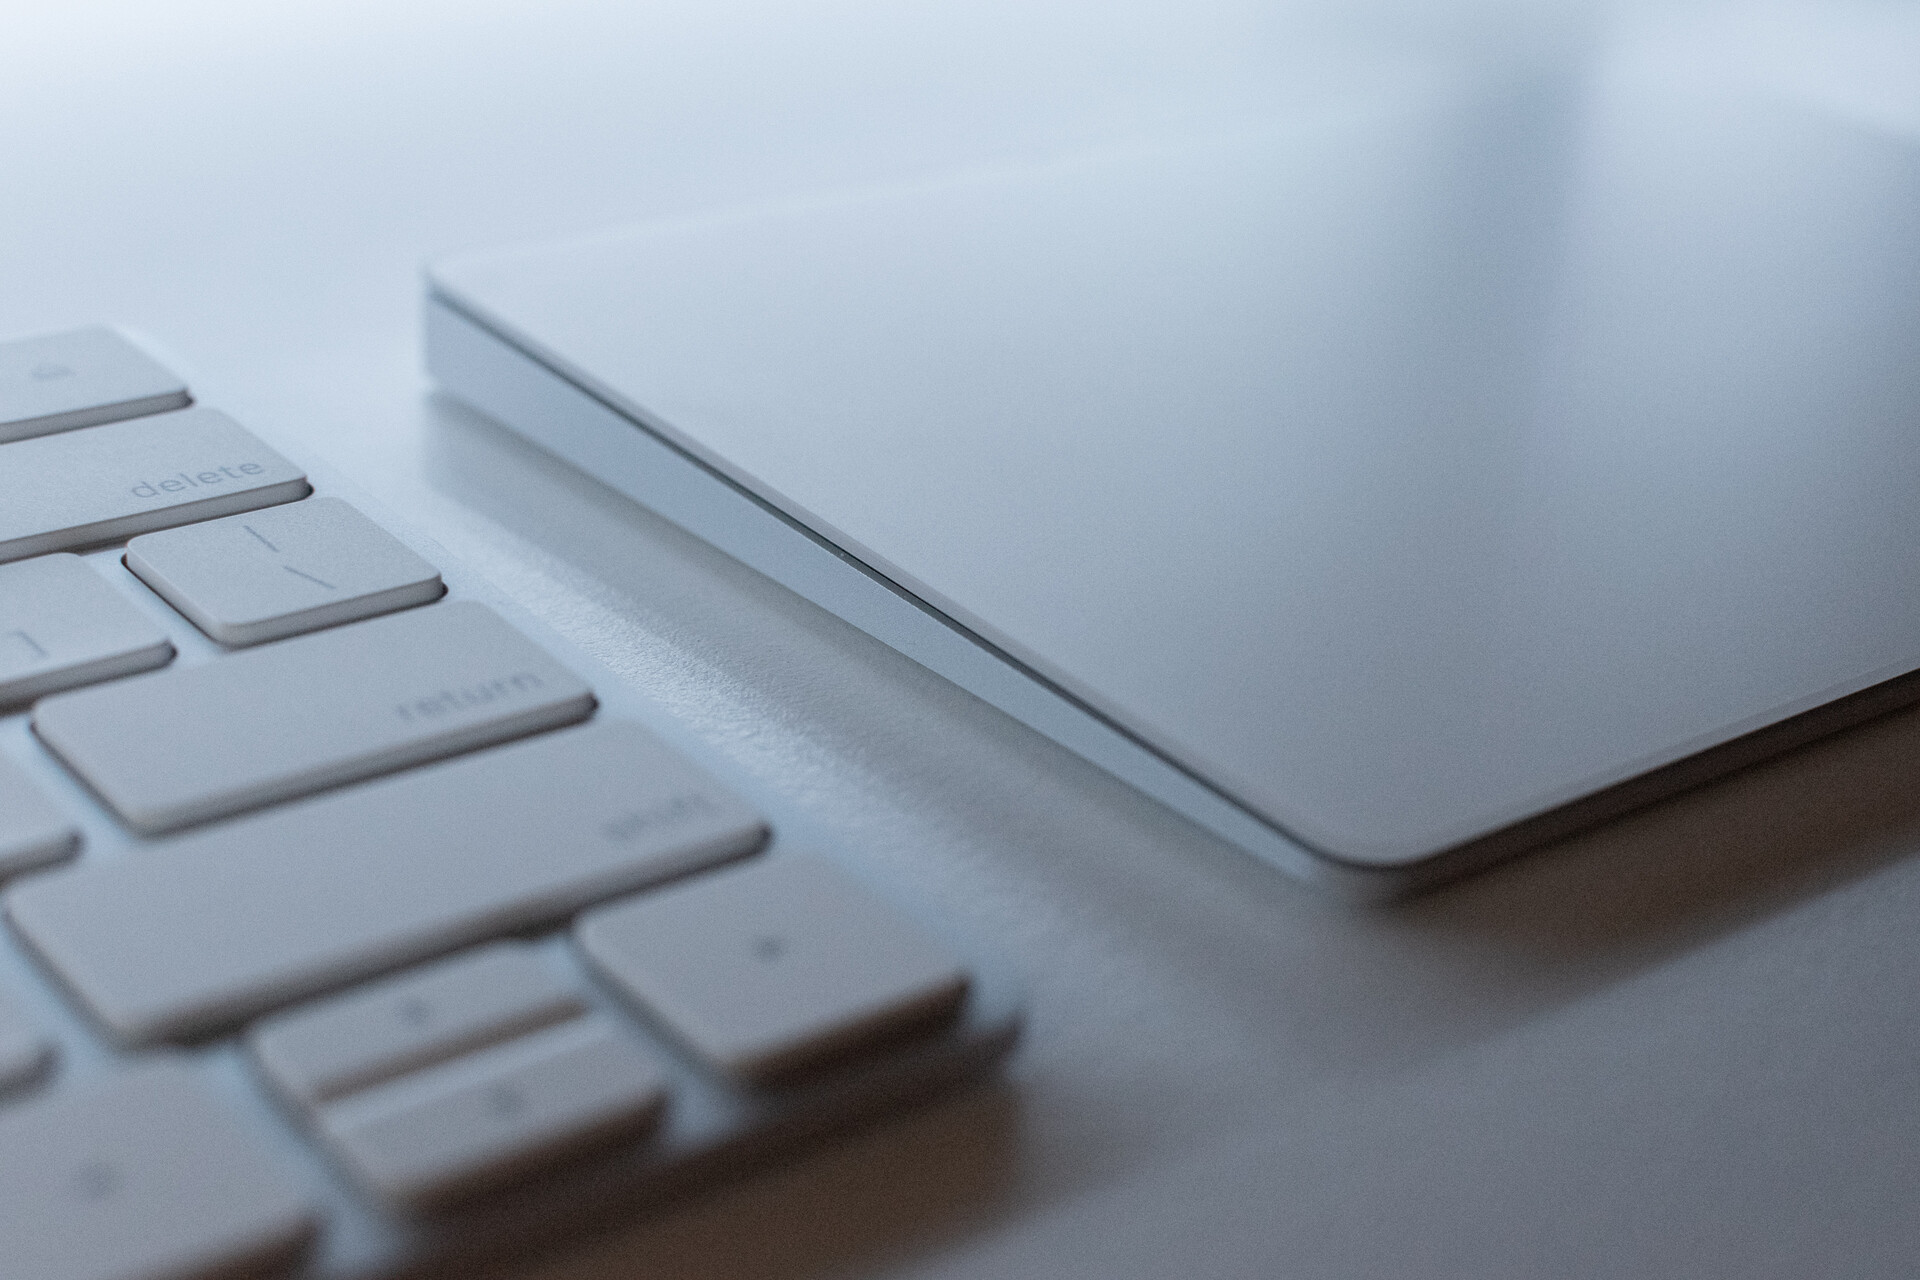 This expensive Macbook-like trackpad may not be worth your money